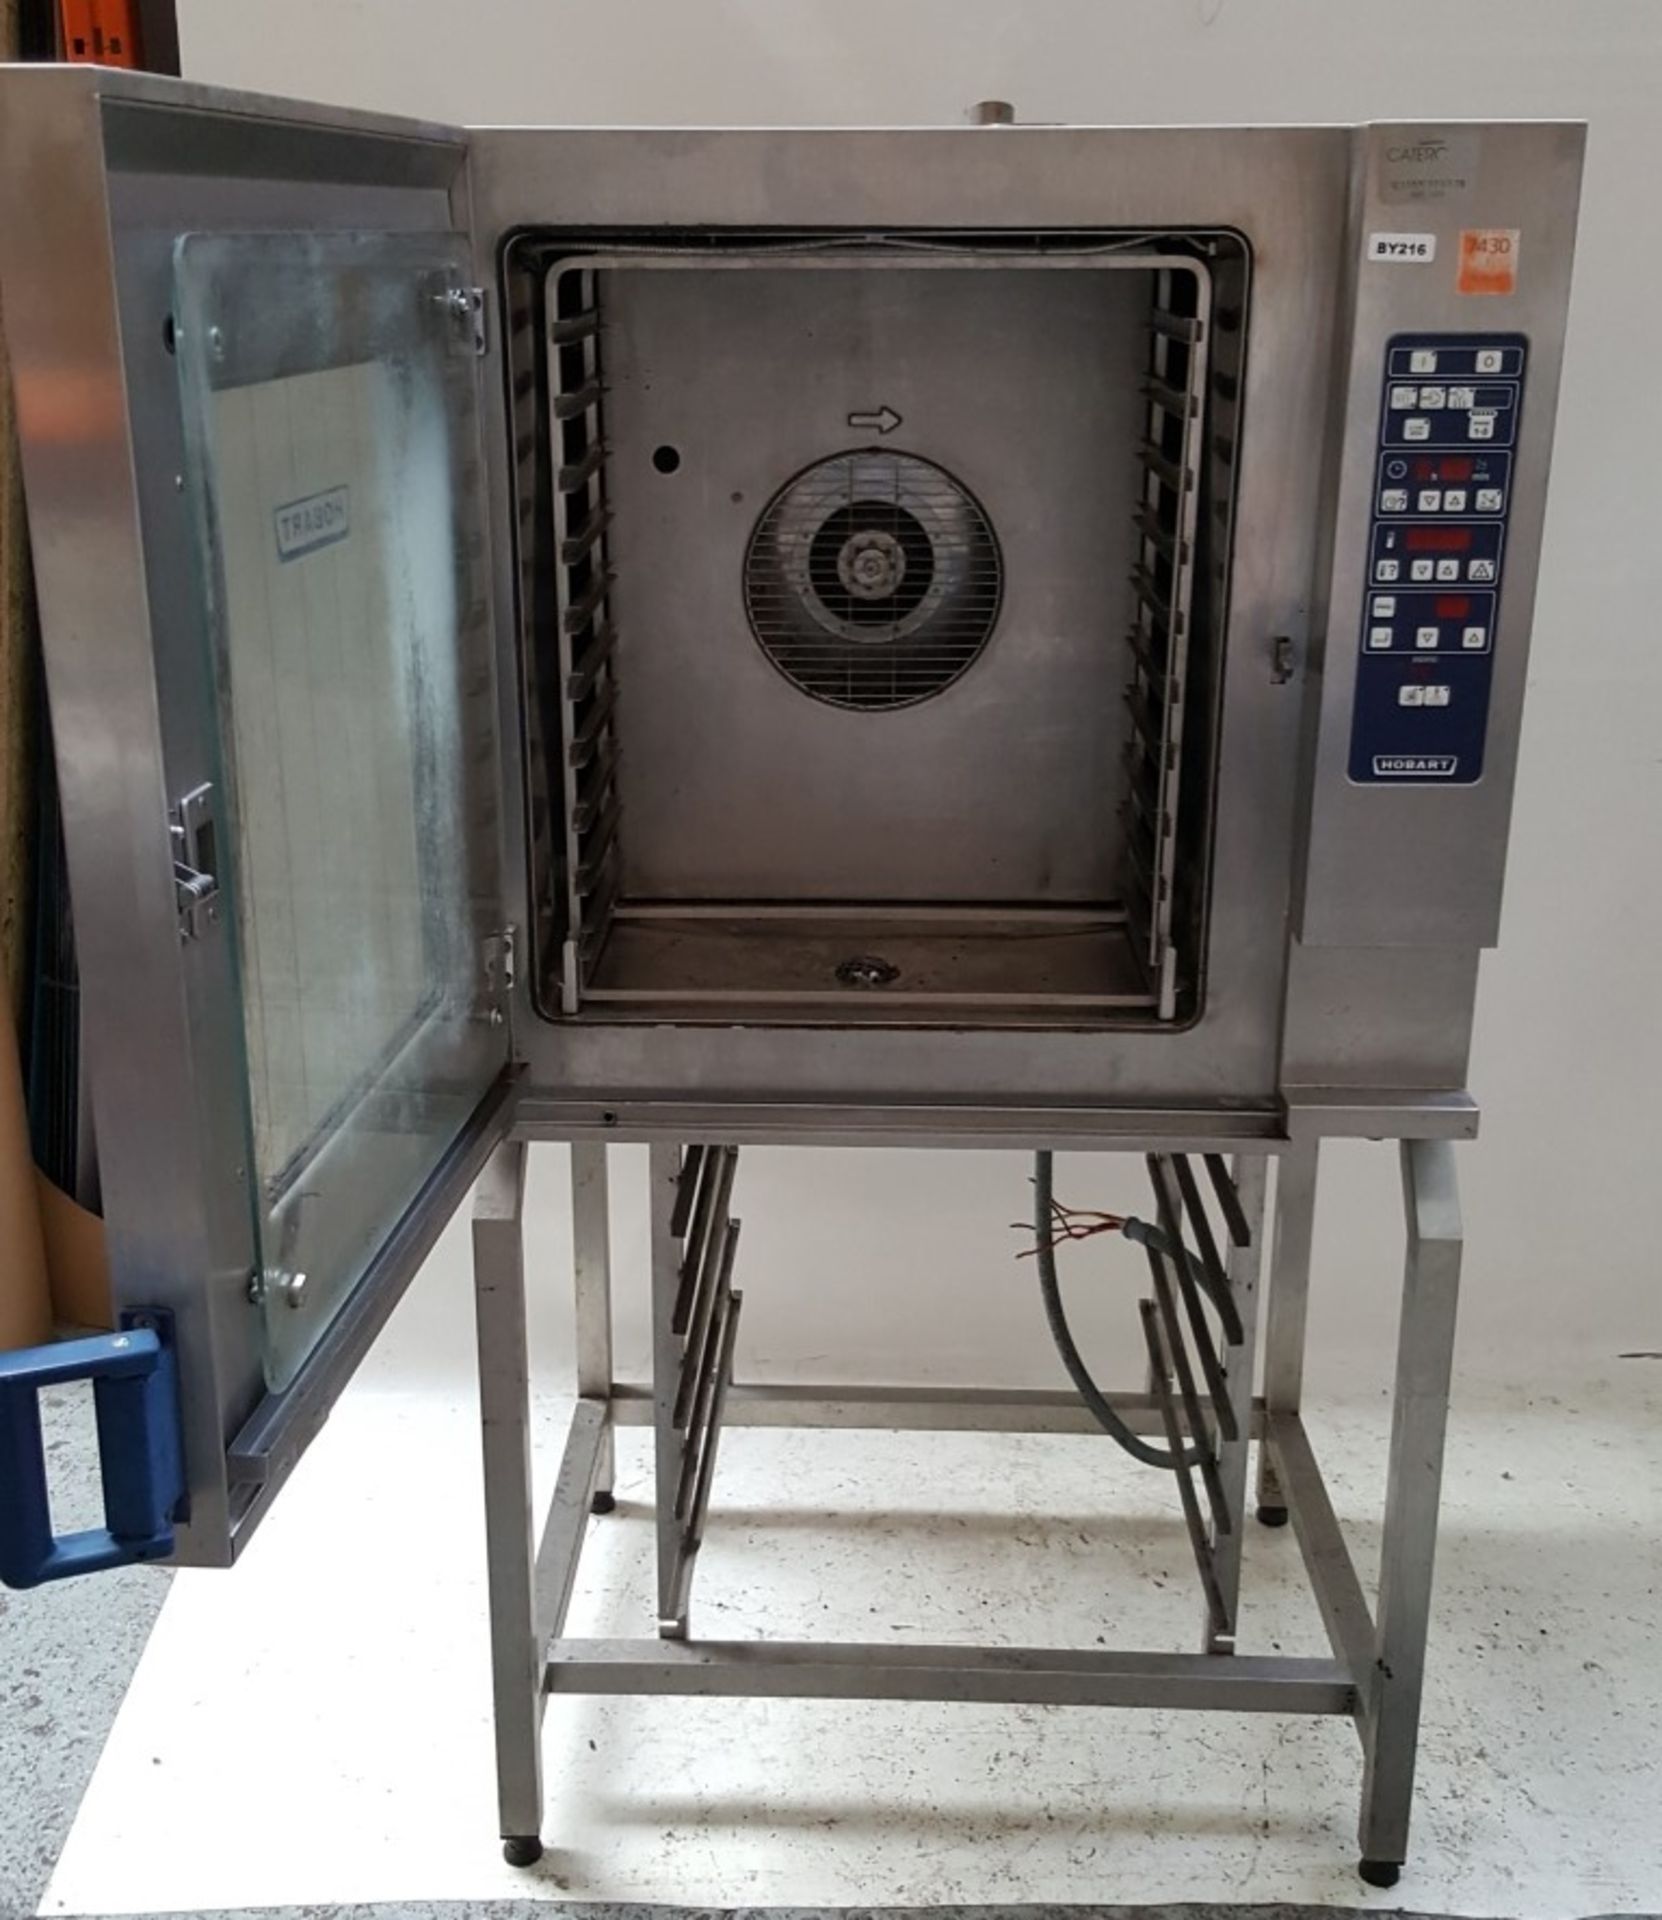 1 x HOBART CSD Electric 10 Grid Combi Oven with Floor Stand - Ref BY216 - Image 7 of 8